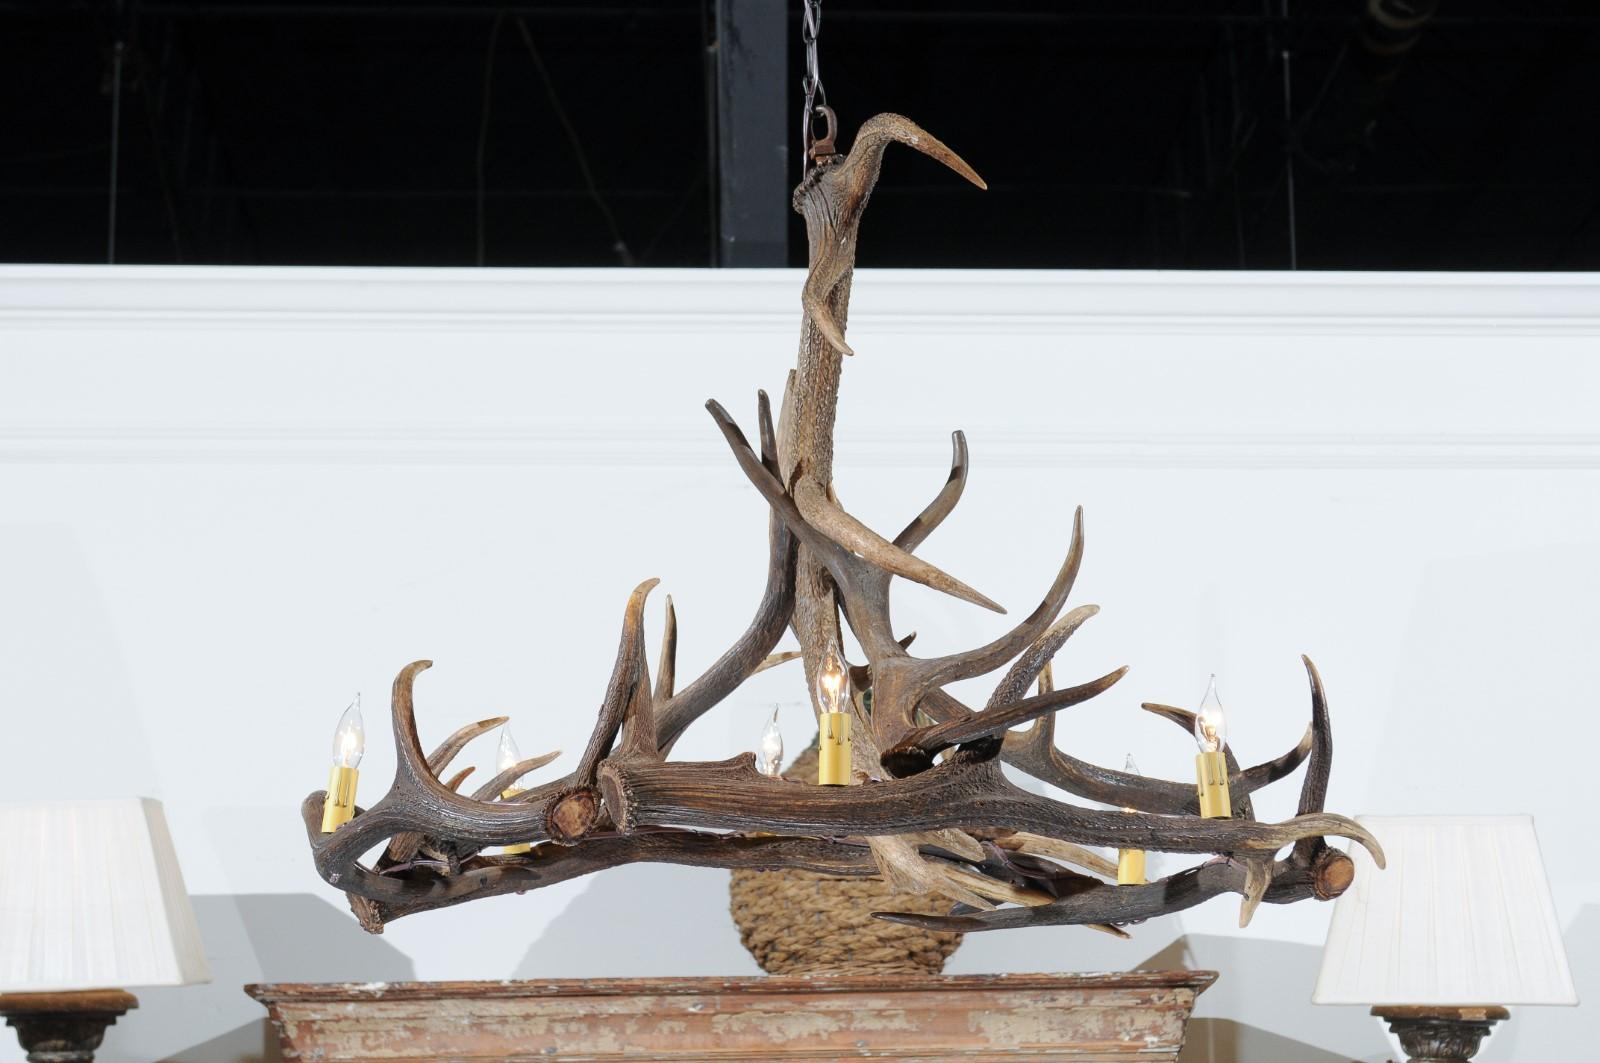 A rustic six-light English fallow deer naturally shed antler chandelier, from the mid-20th century. Born in England during the 1960s, this chandelier features a striking silhouette made from naturally shed fallow deer antlers supporting candle